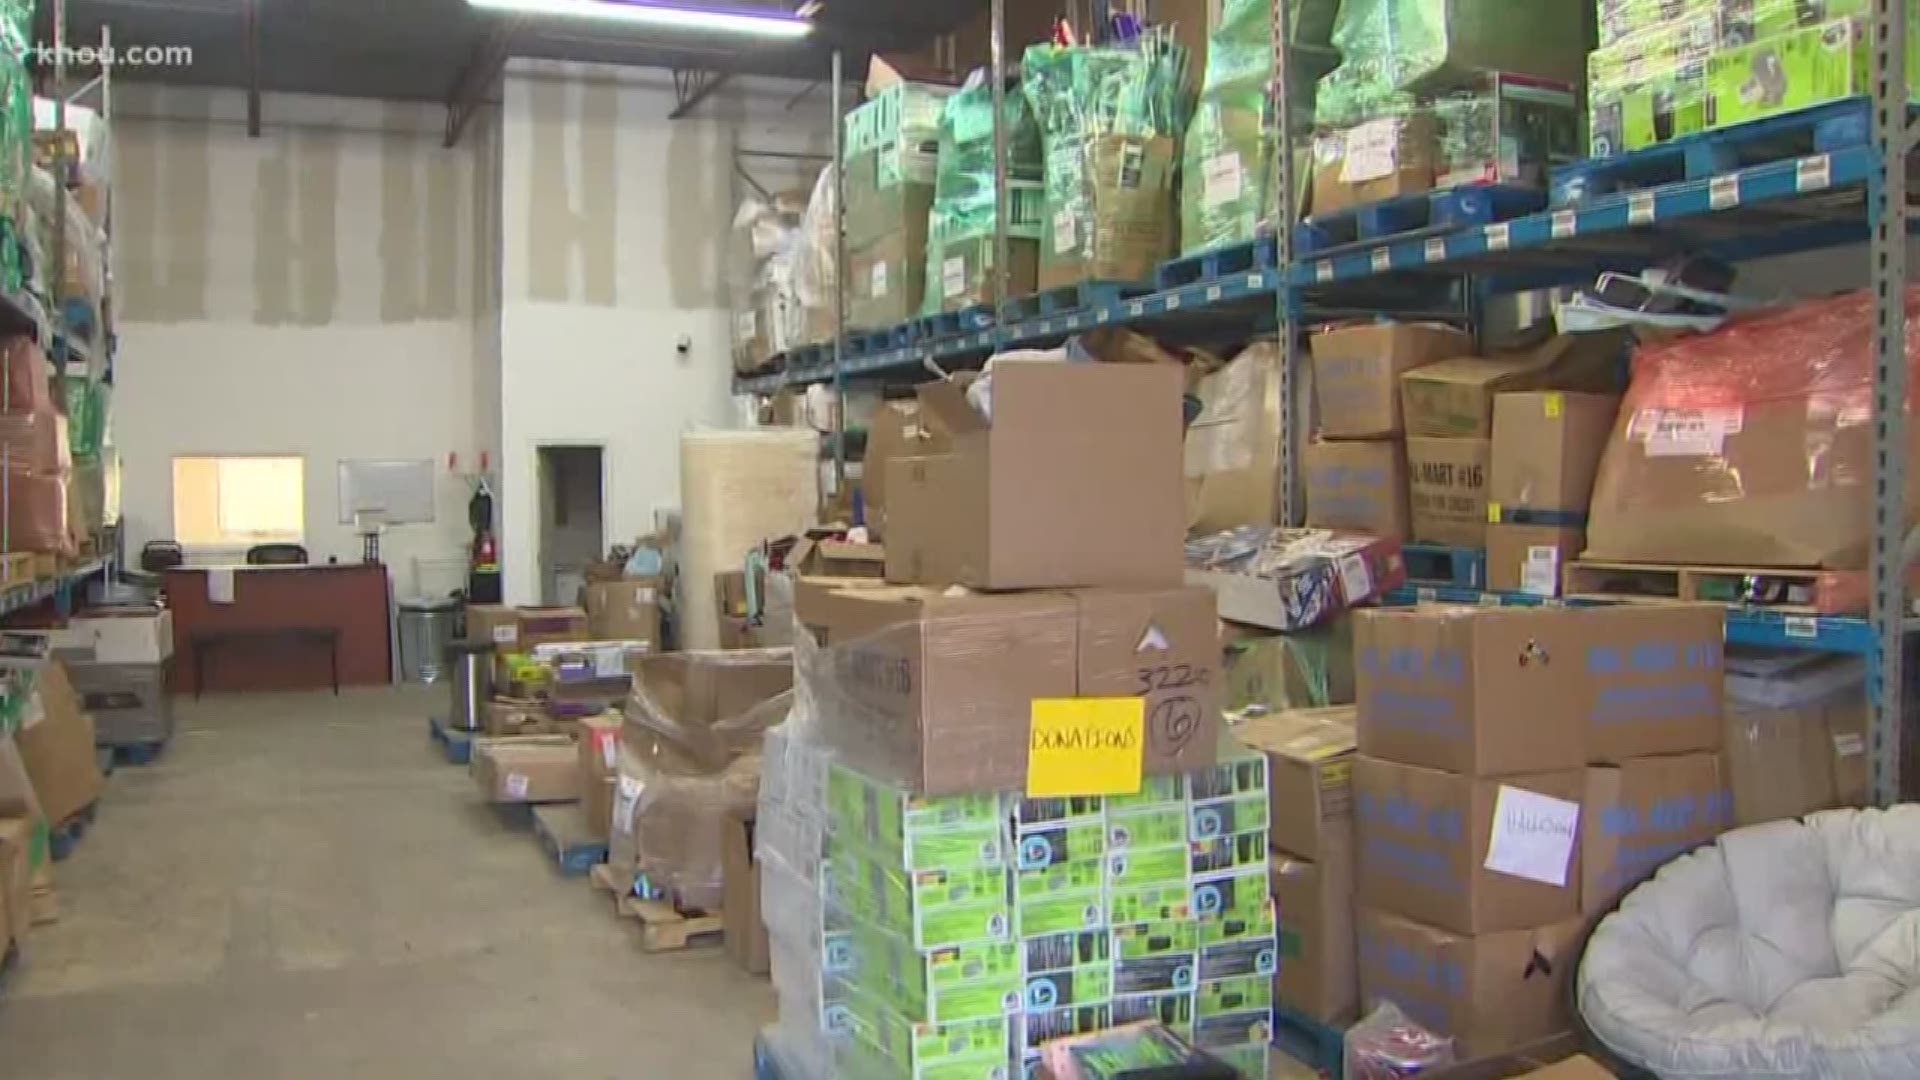 As community members donate items to government employees who are not getting paid, a local nonprofit is also giving workers extra cash to use however they need.